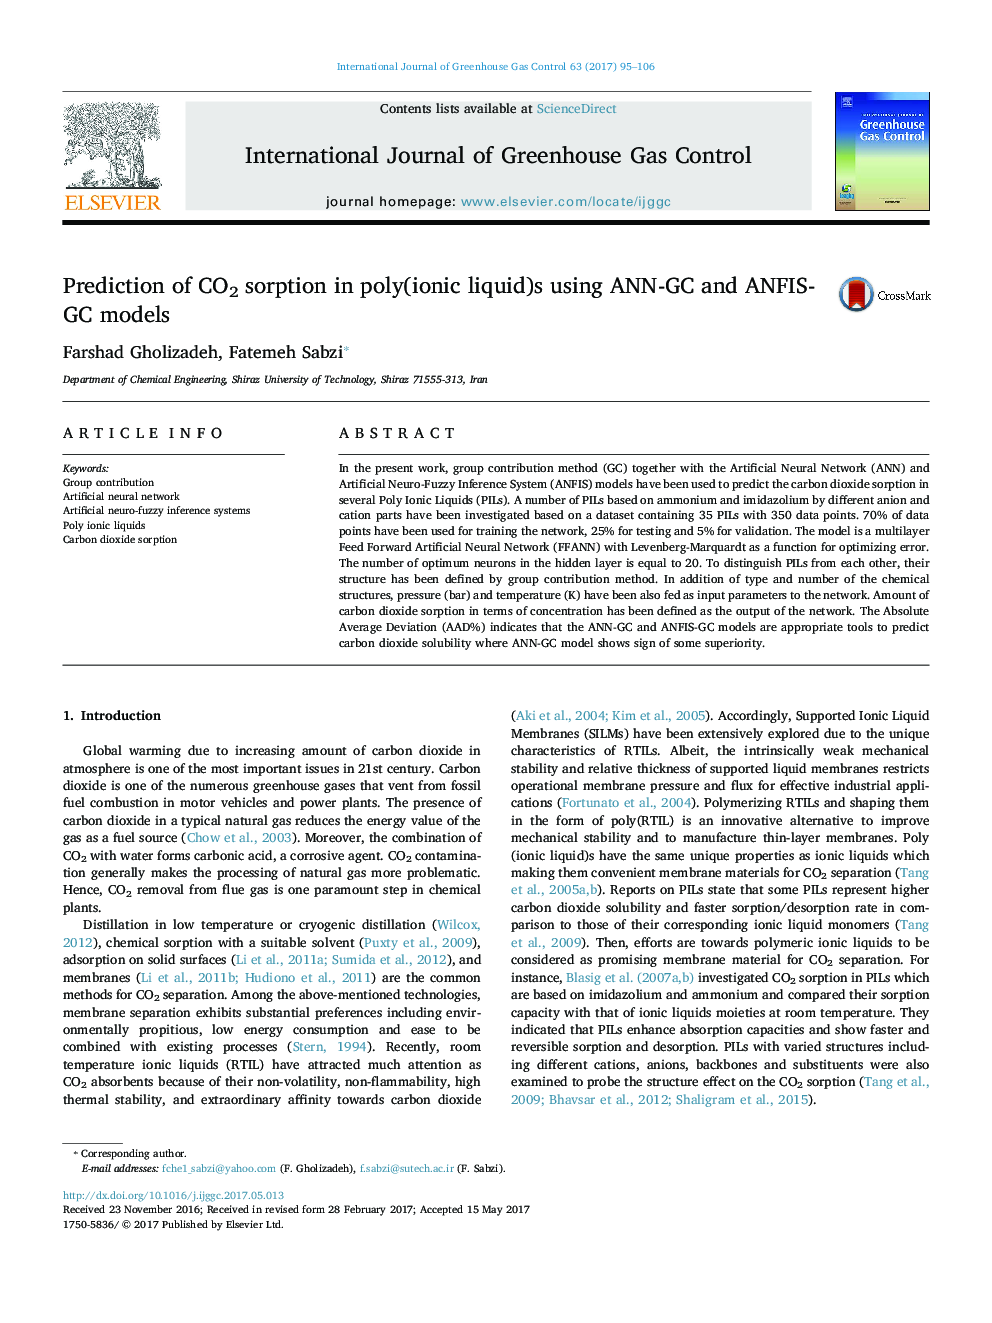 Prediction of CO2 sorption in poly(ionic liquid)s using ANN-GC and ANFIS-GC models